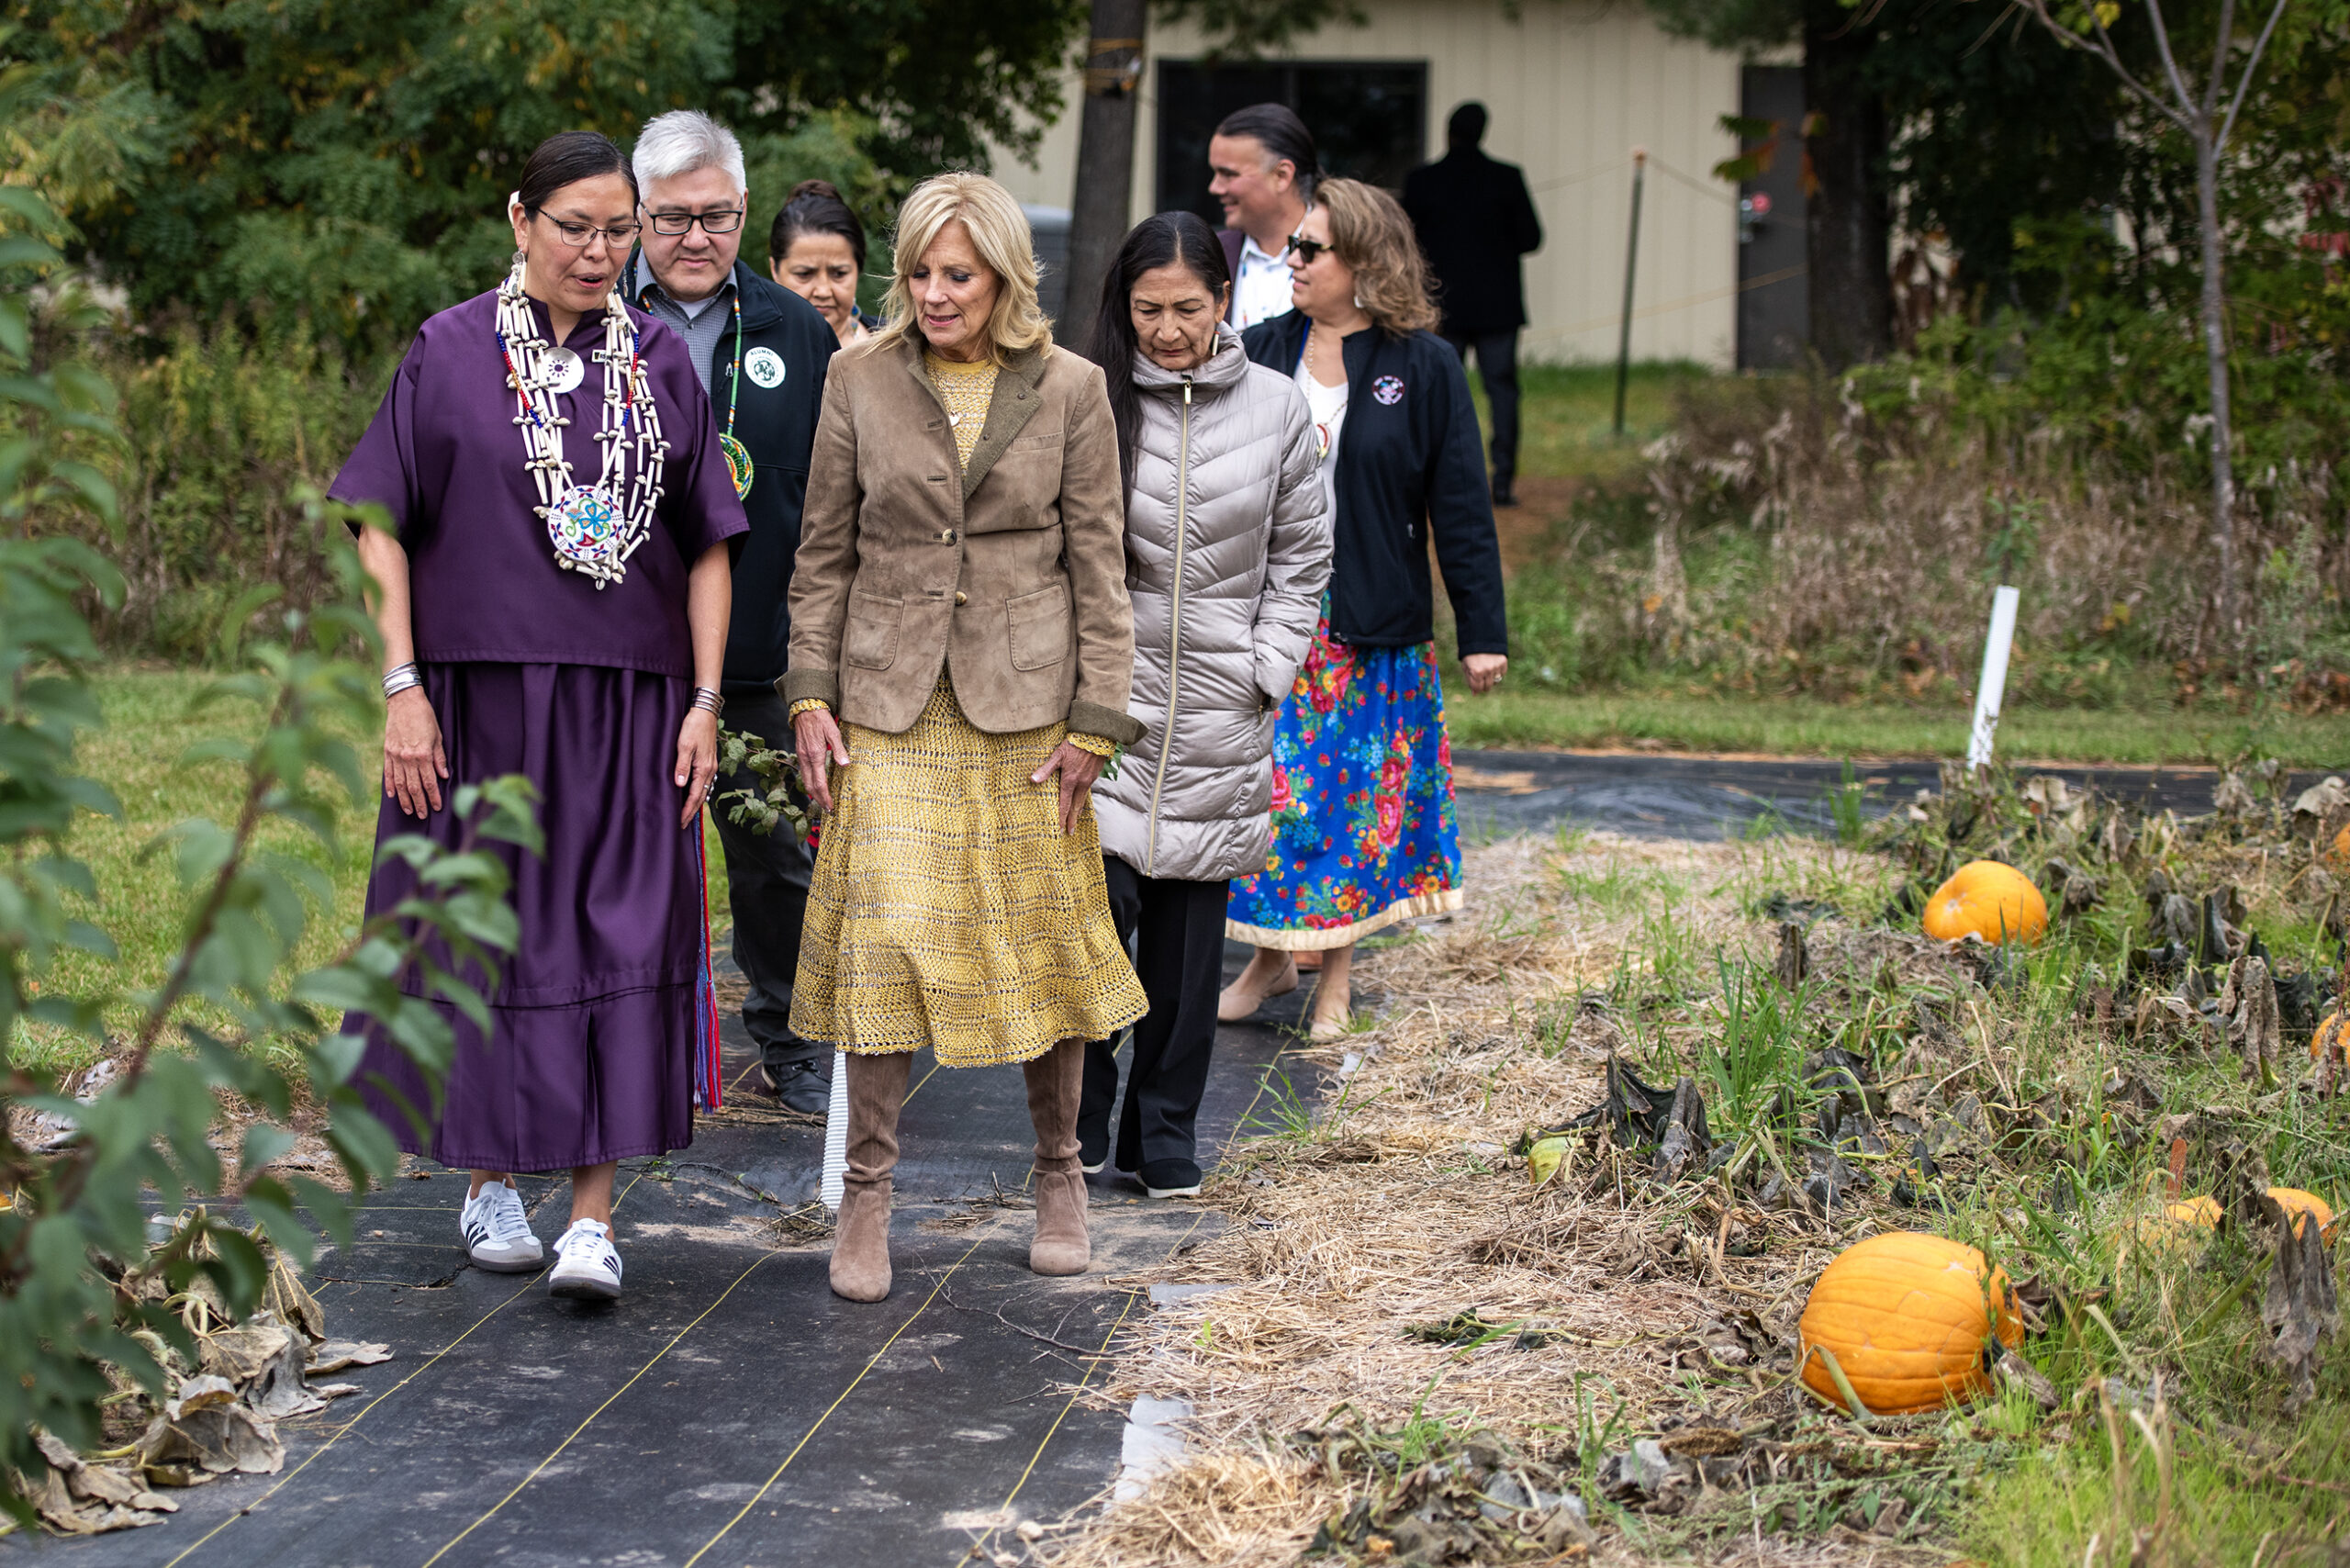 Jill Biden and Deb Harland walk with other leaders through a garden. Pumpkins can be seen growing in a patch.